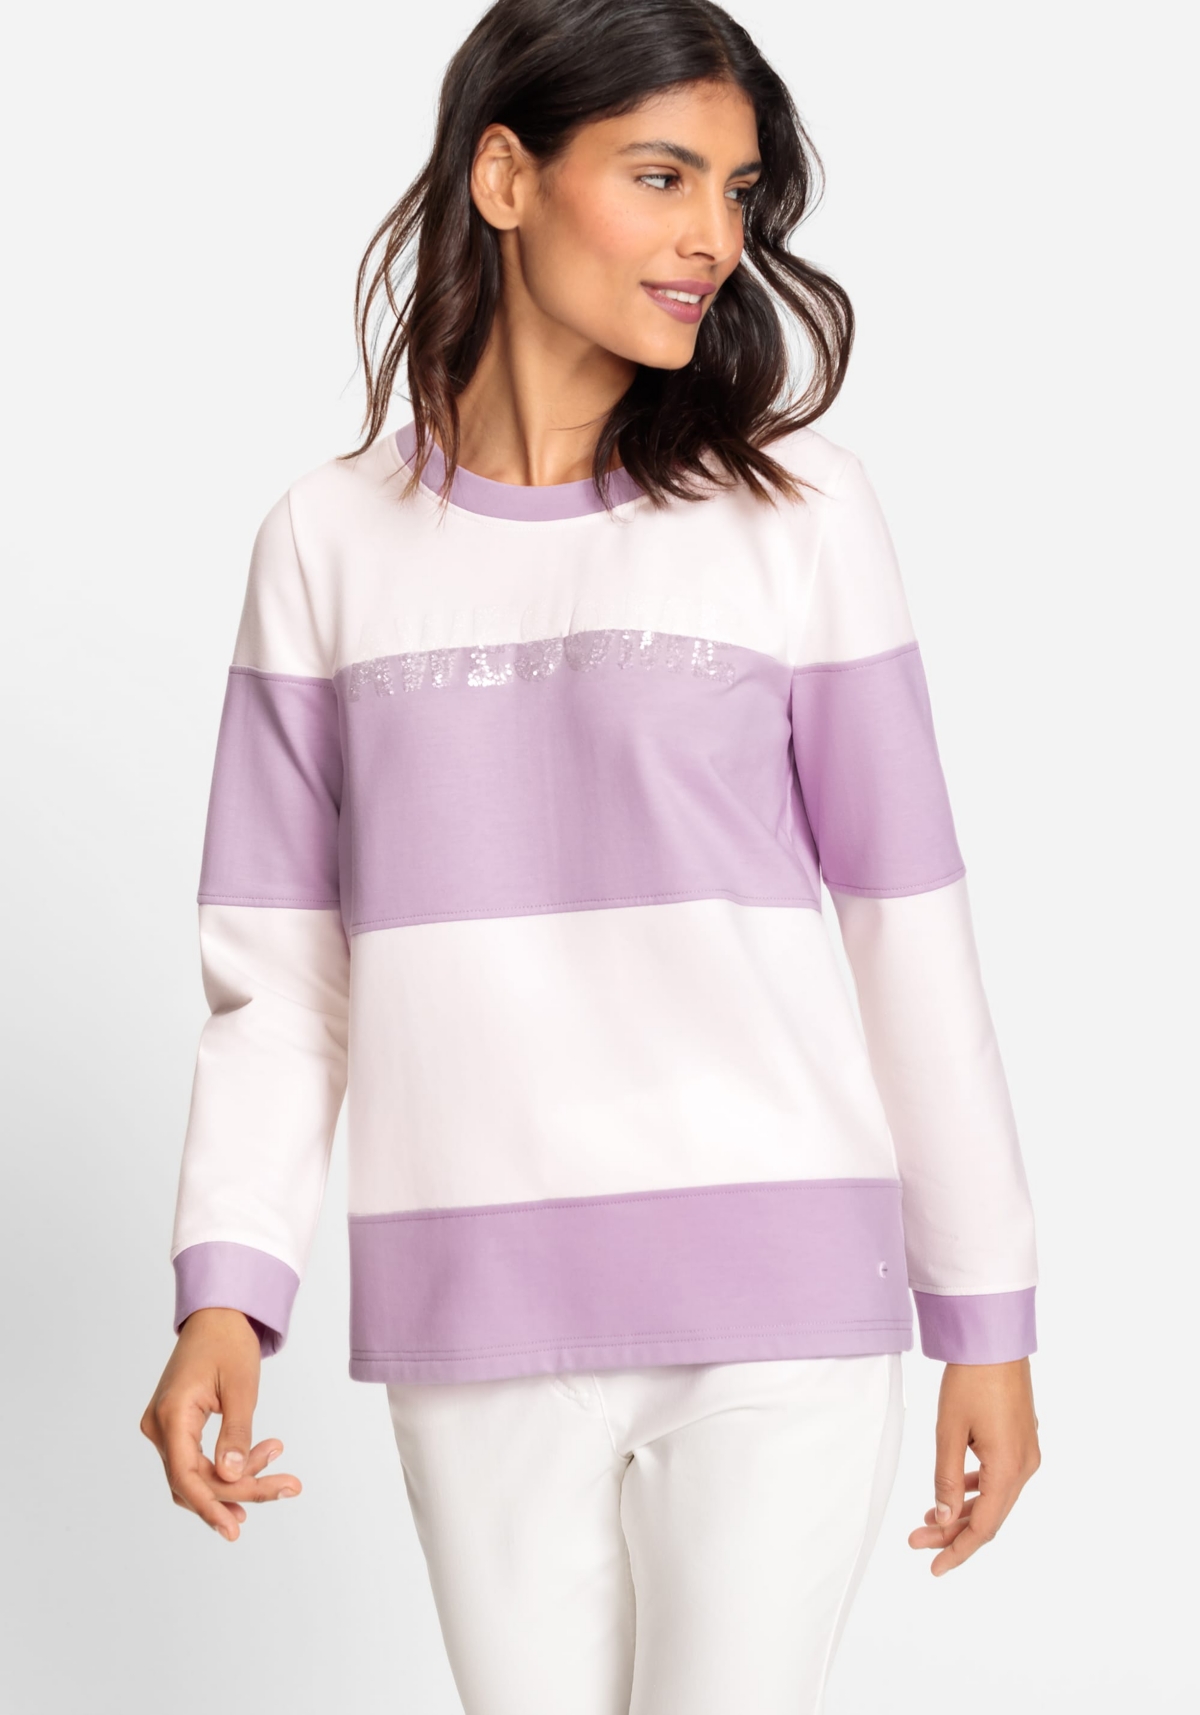 Long Sleeve Crewneck Jersey Top with Sequins - Soft lilac